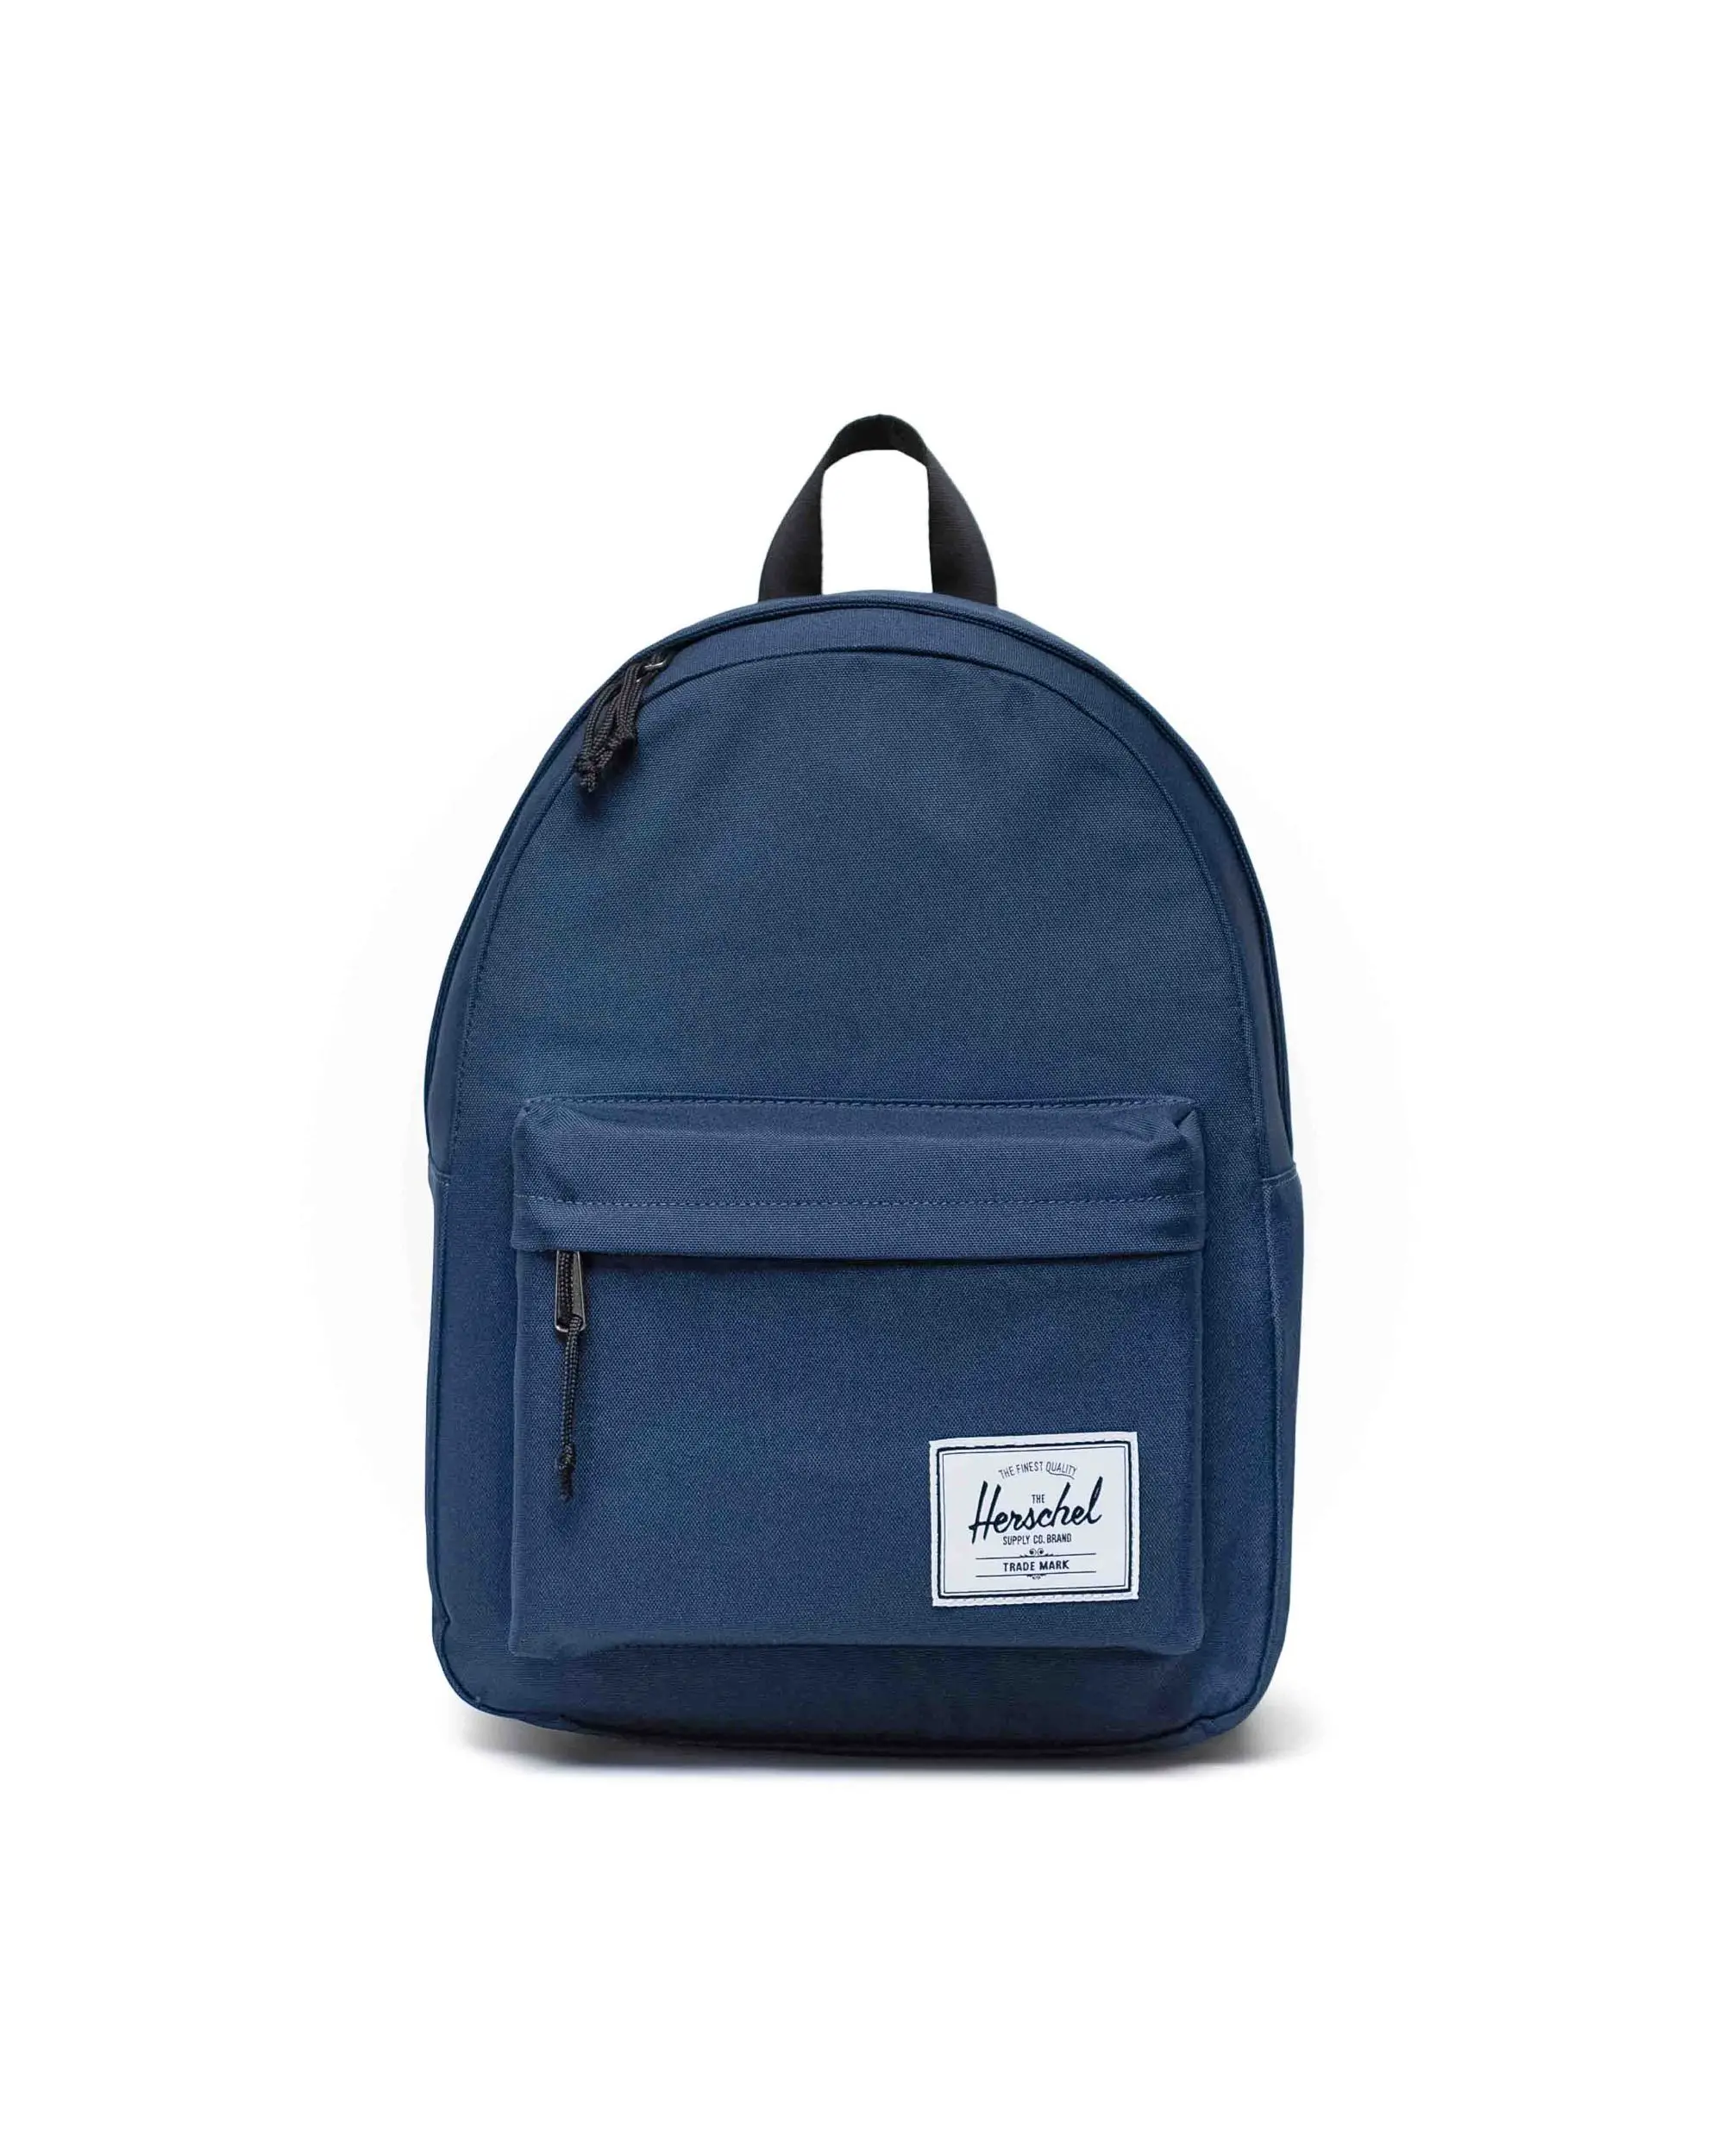 Unlock Wilderness' choice in the Herschel Vs North Face comparison, the Classic Backpack by Herschel